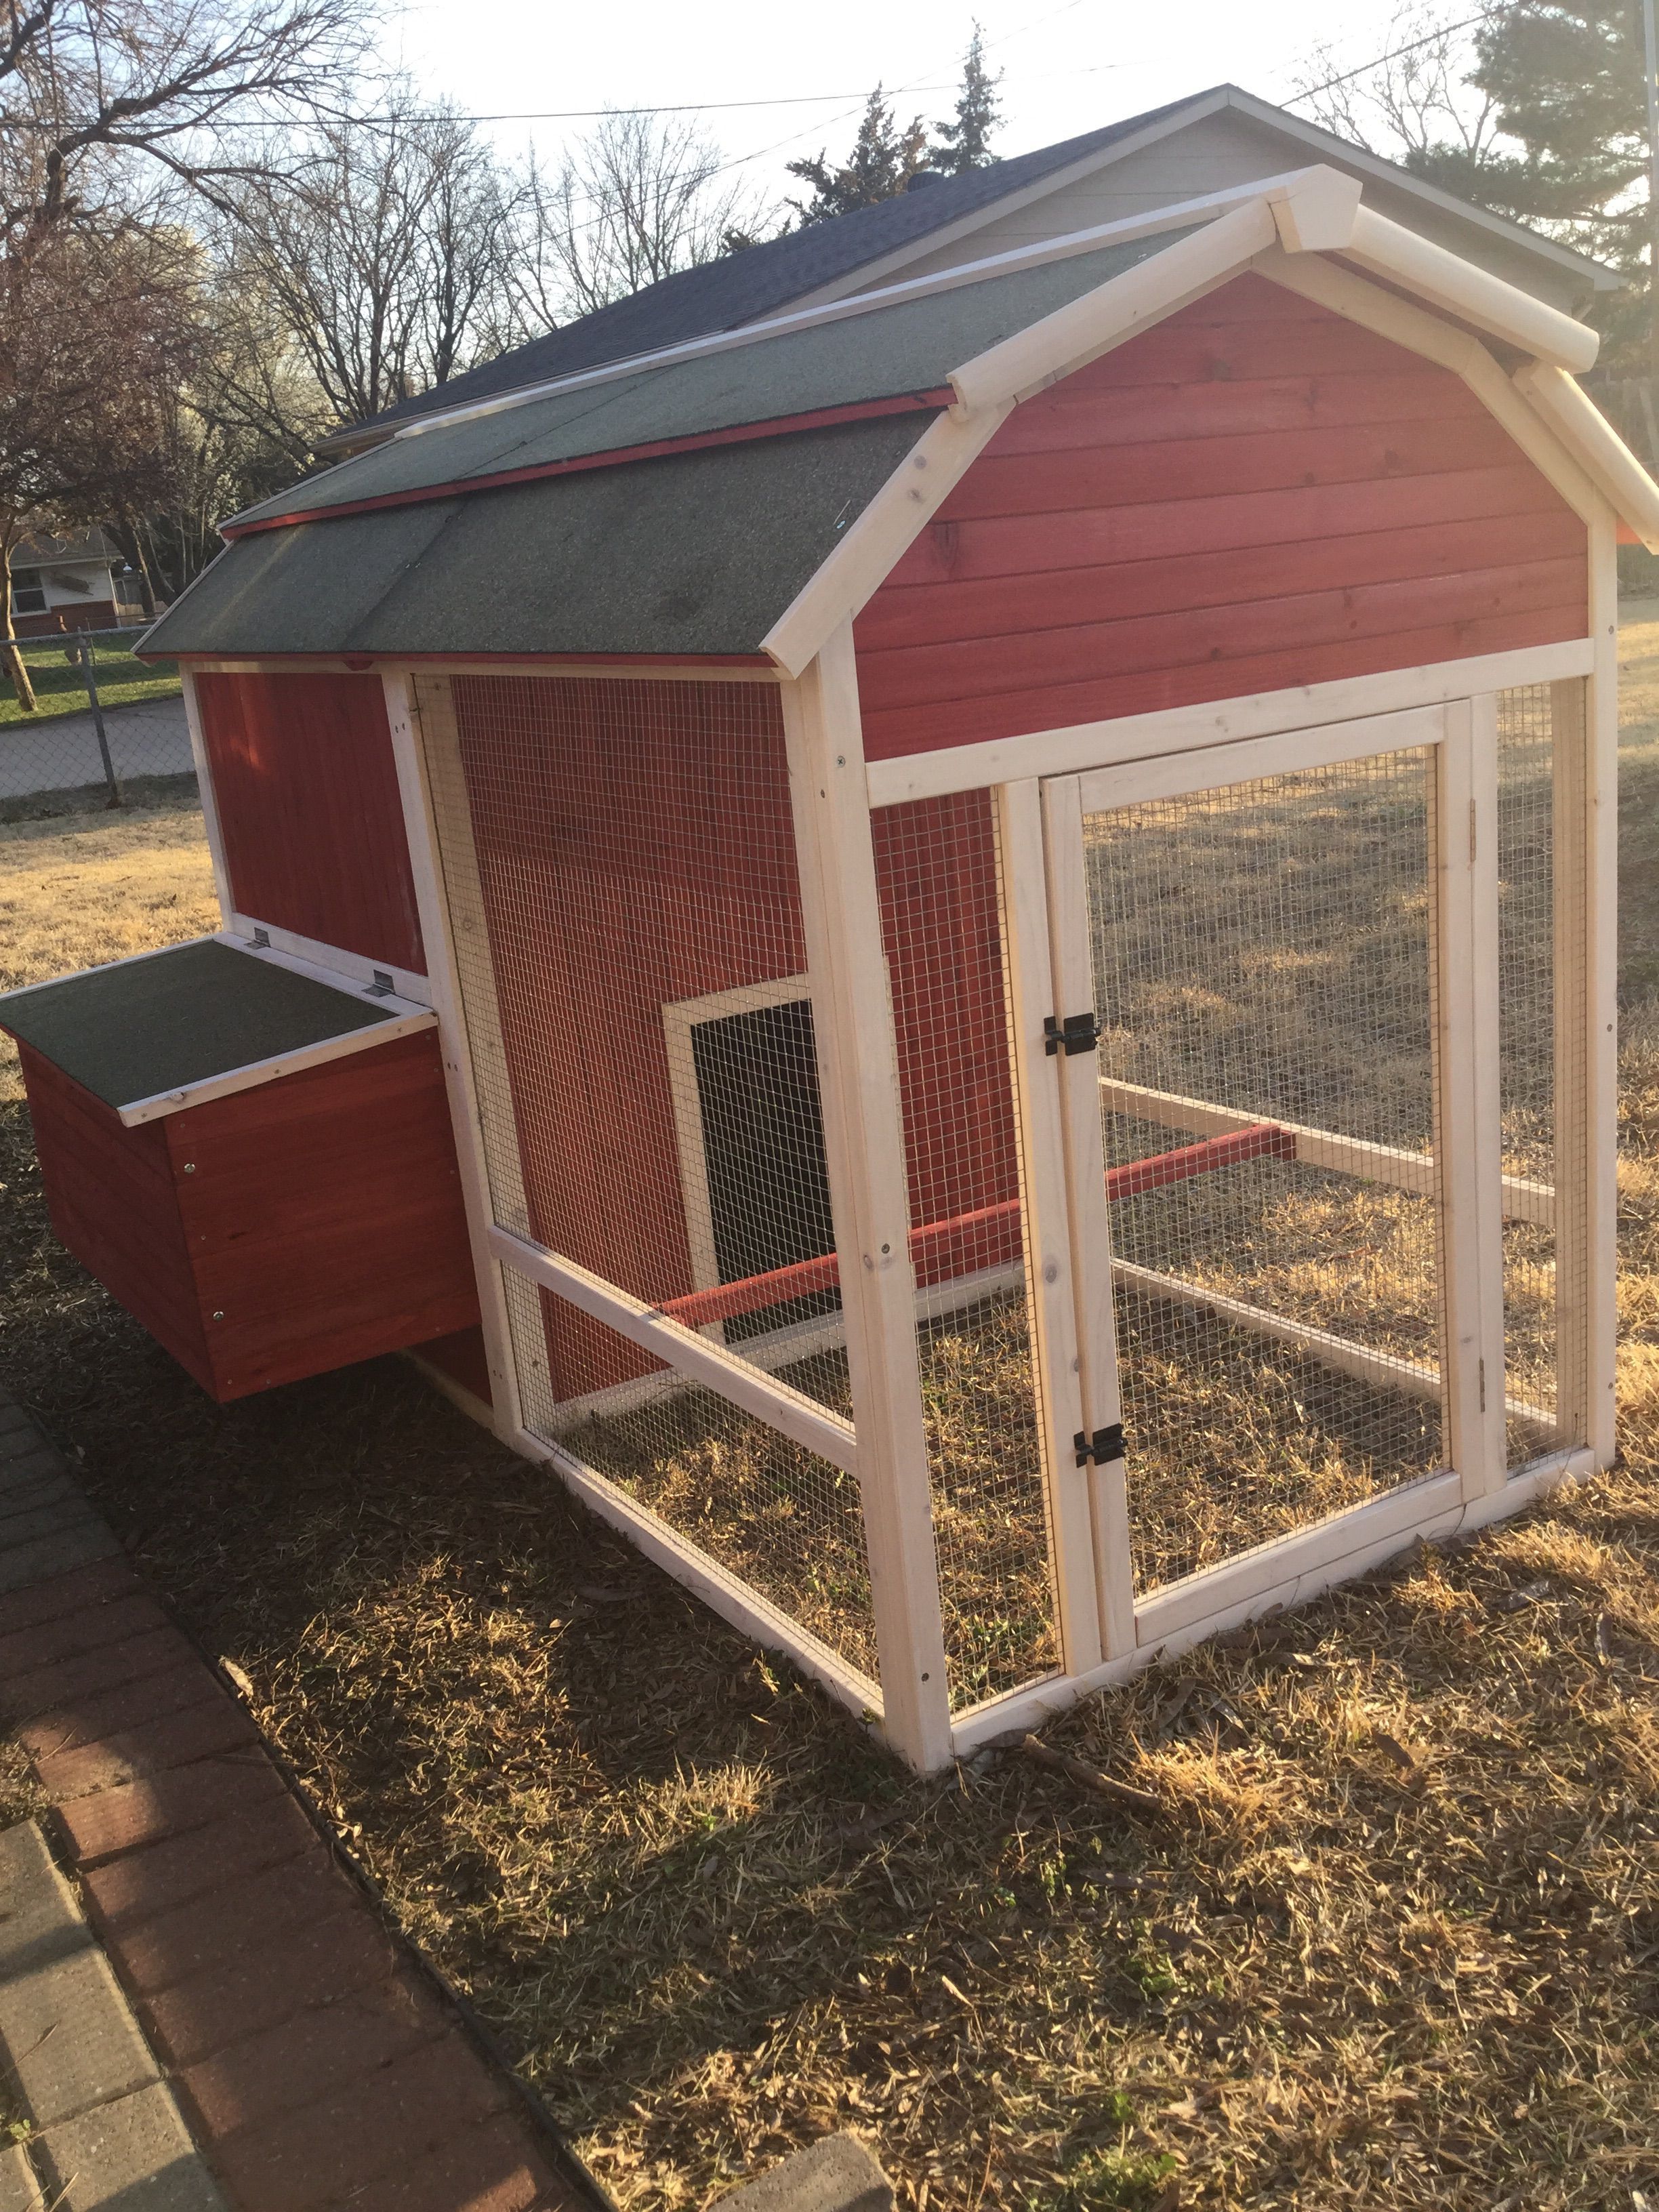 Our chicken coop